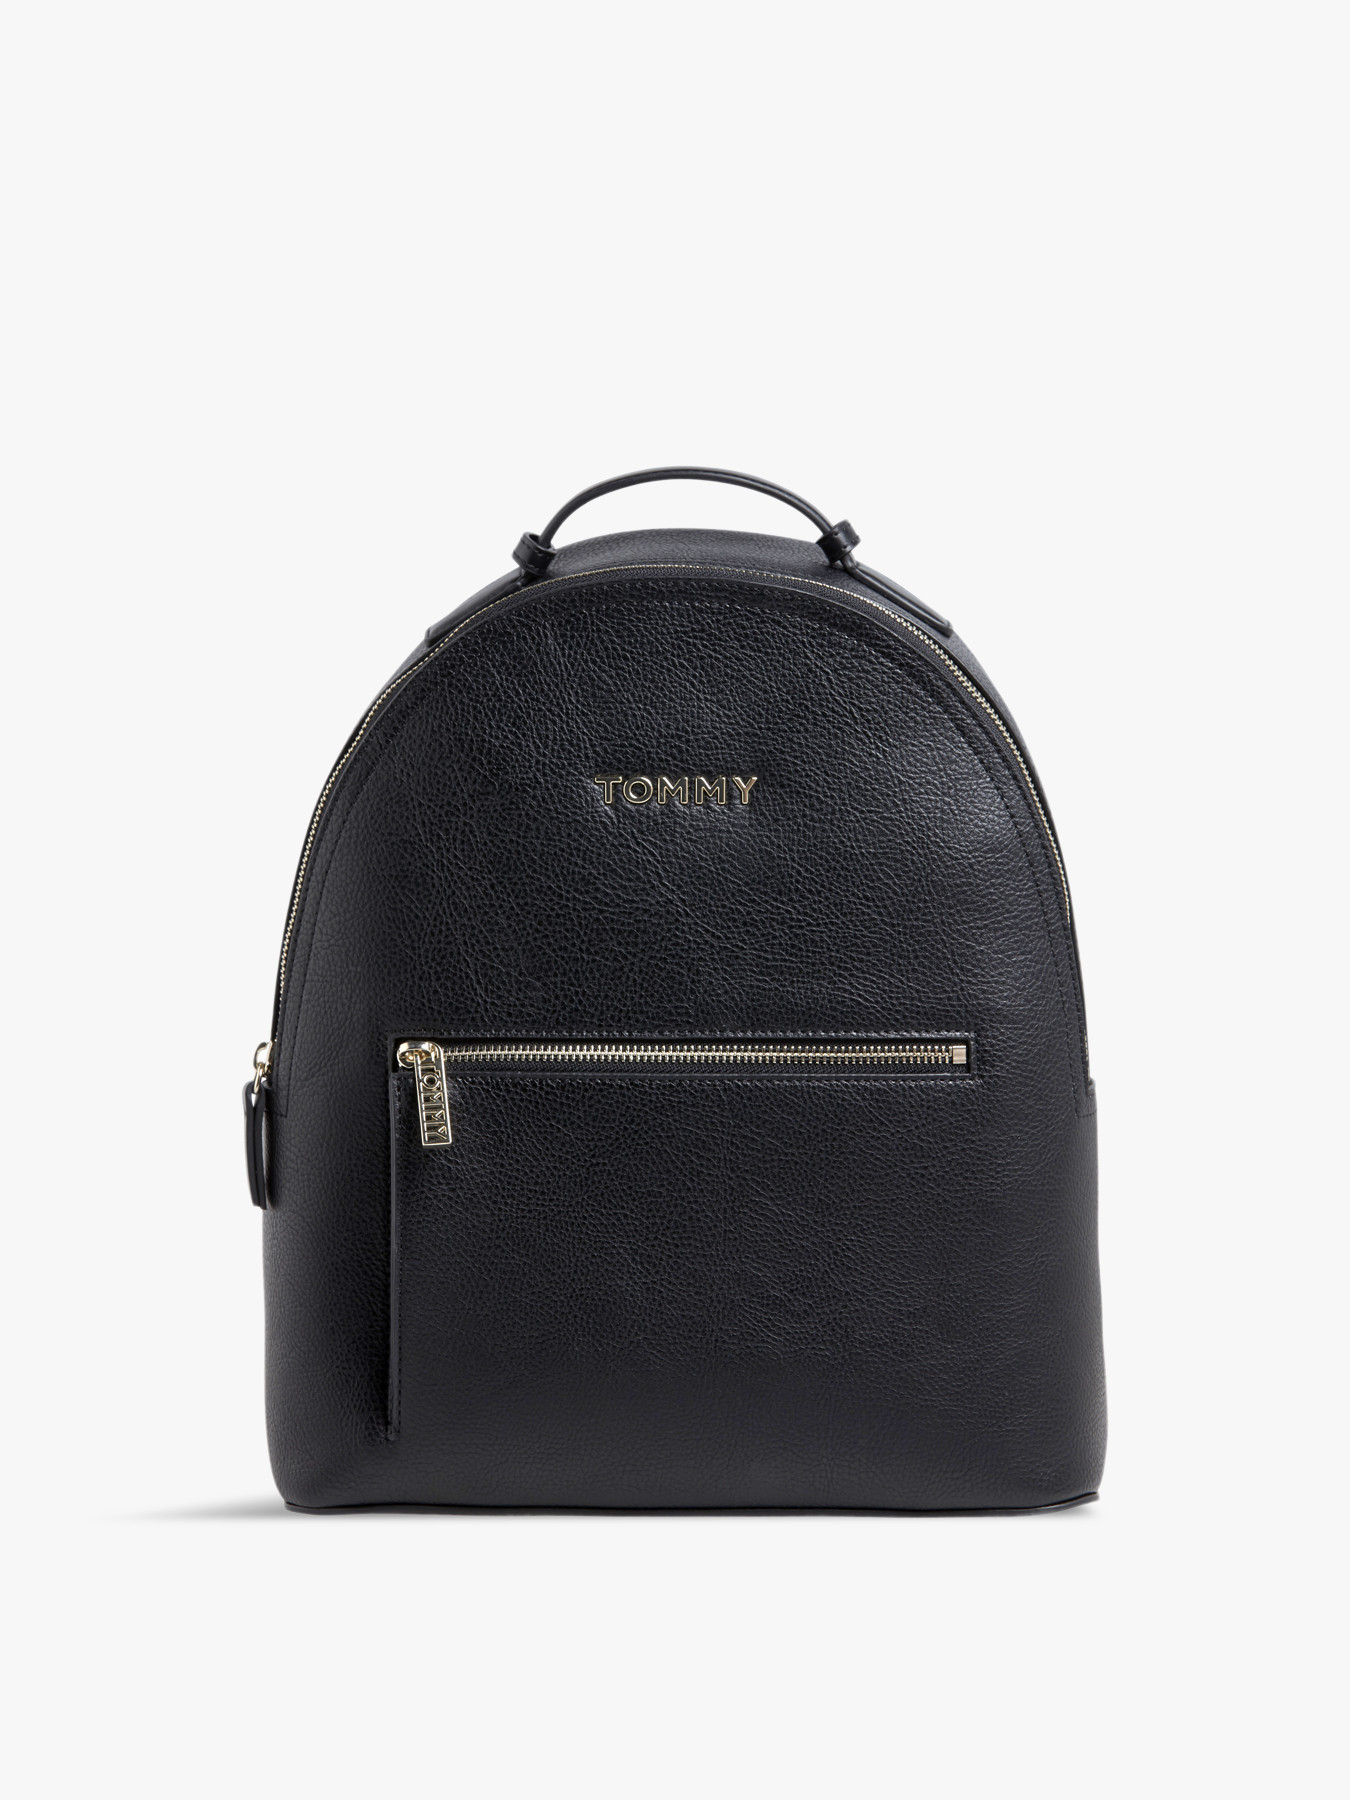 Women's Tommy Hilfiger Iconic Tommy Backpack | Fenwick